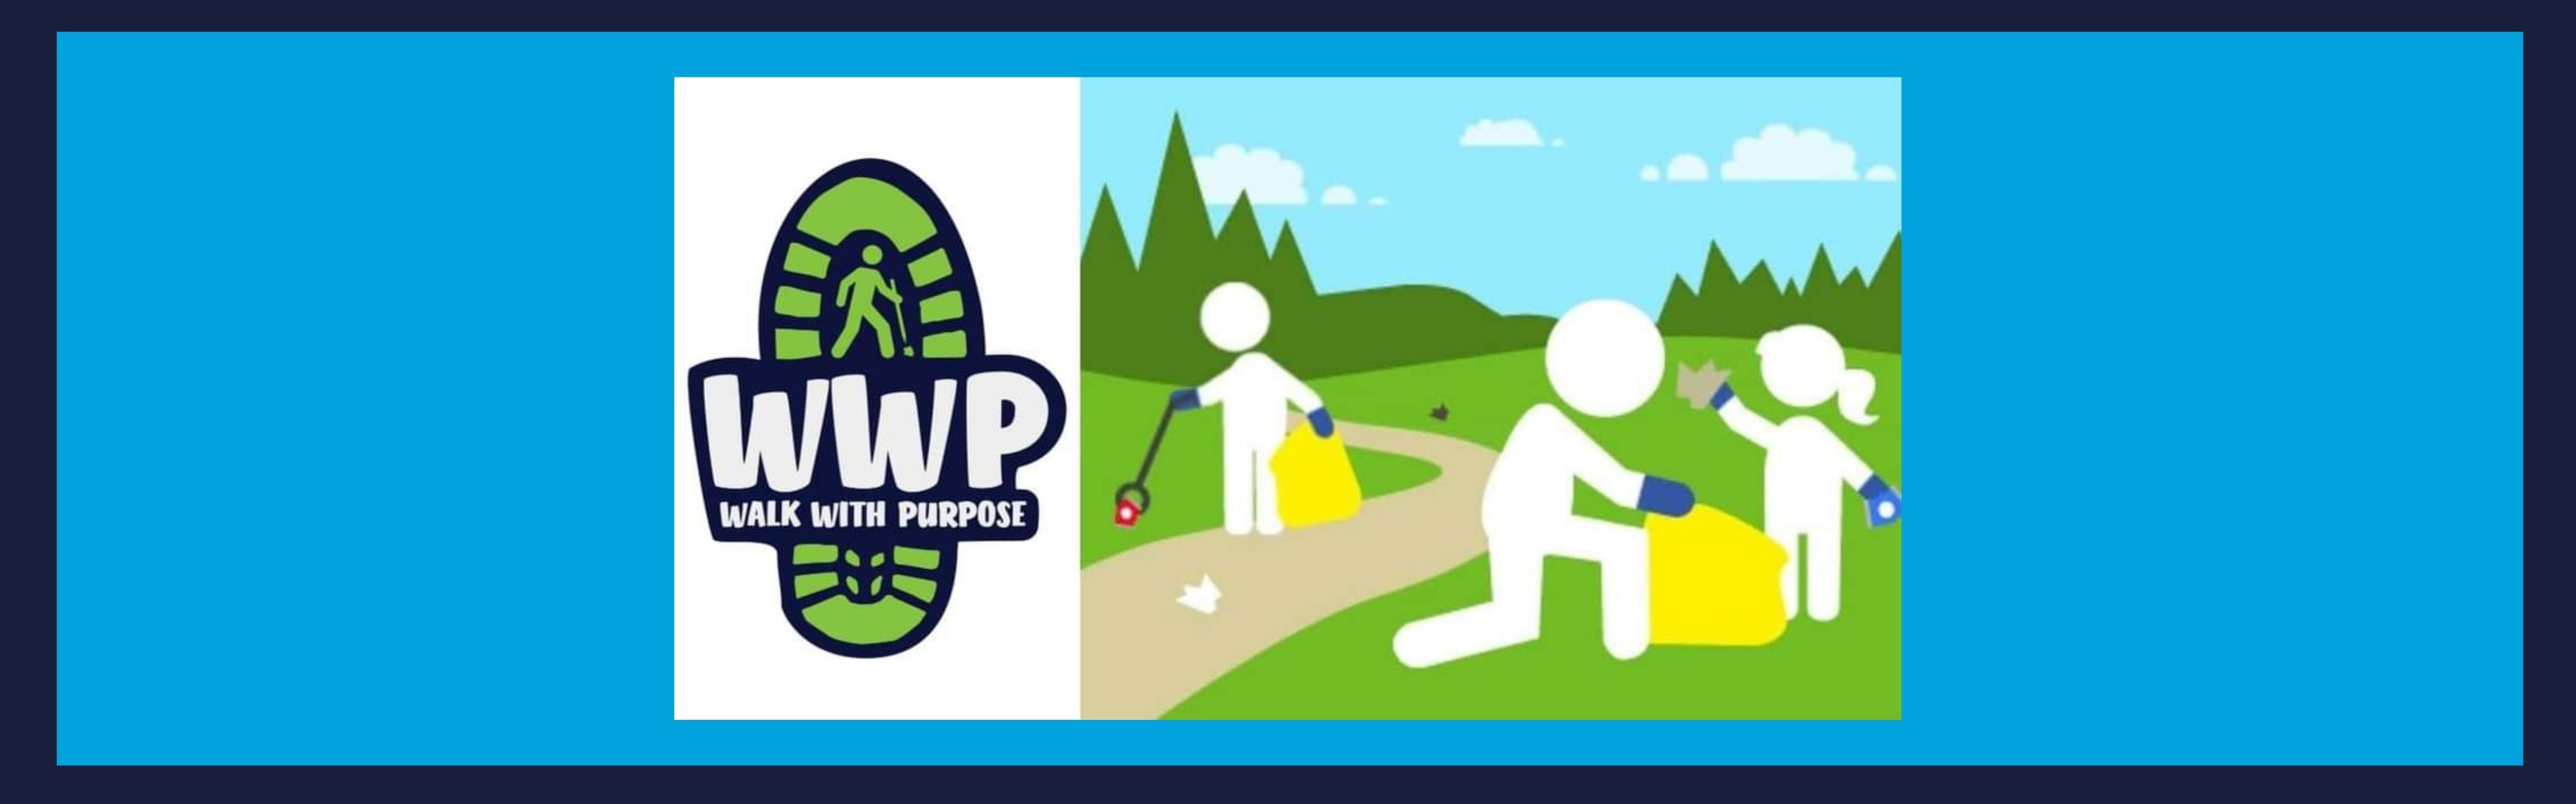 wwp logo with cartoon of people picking up litter